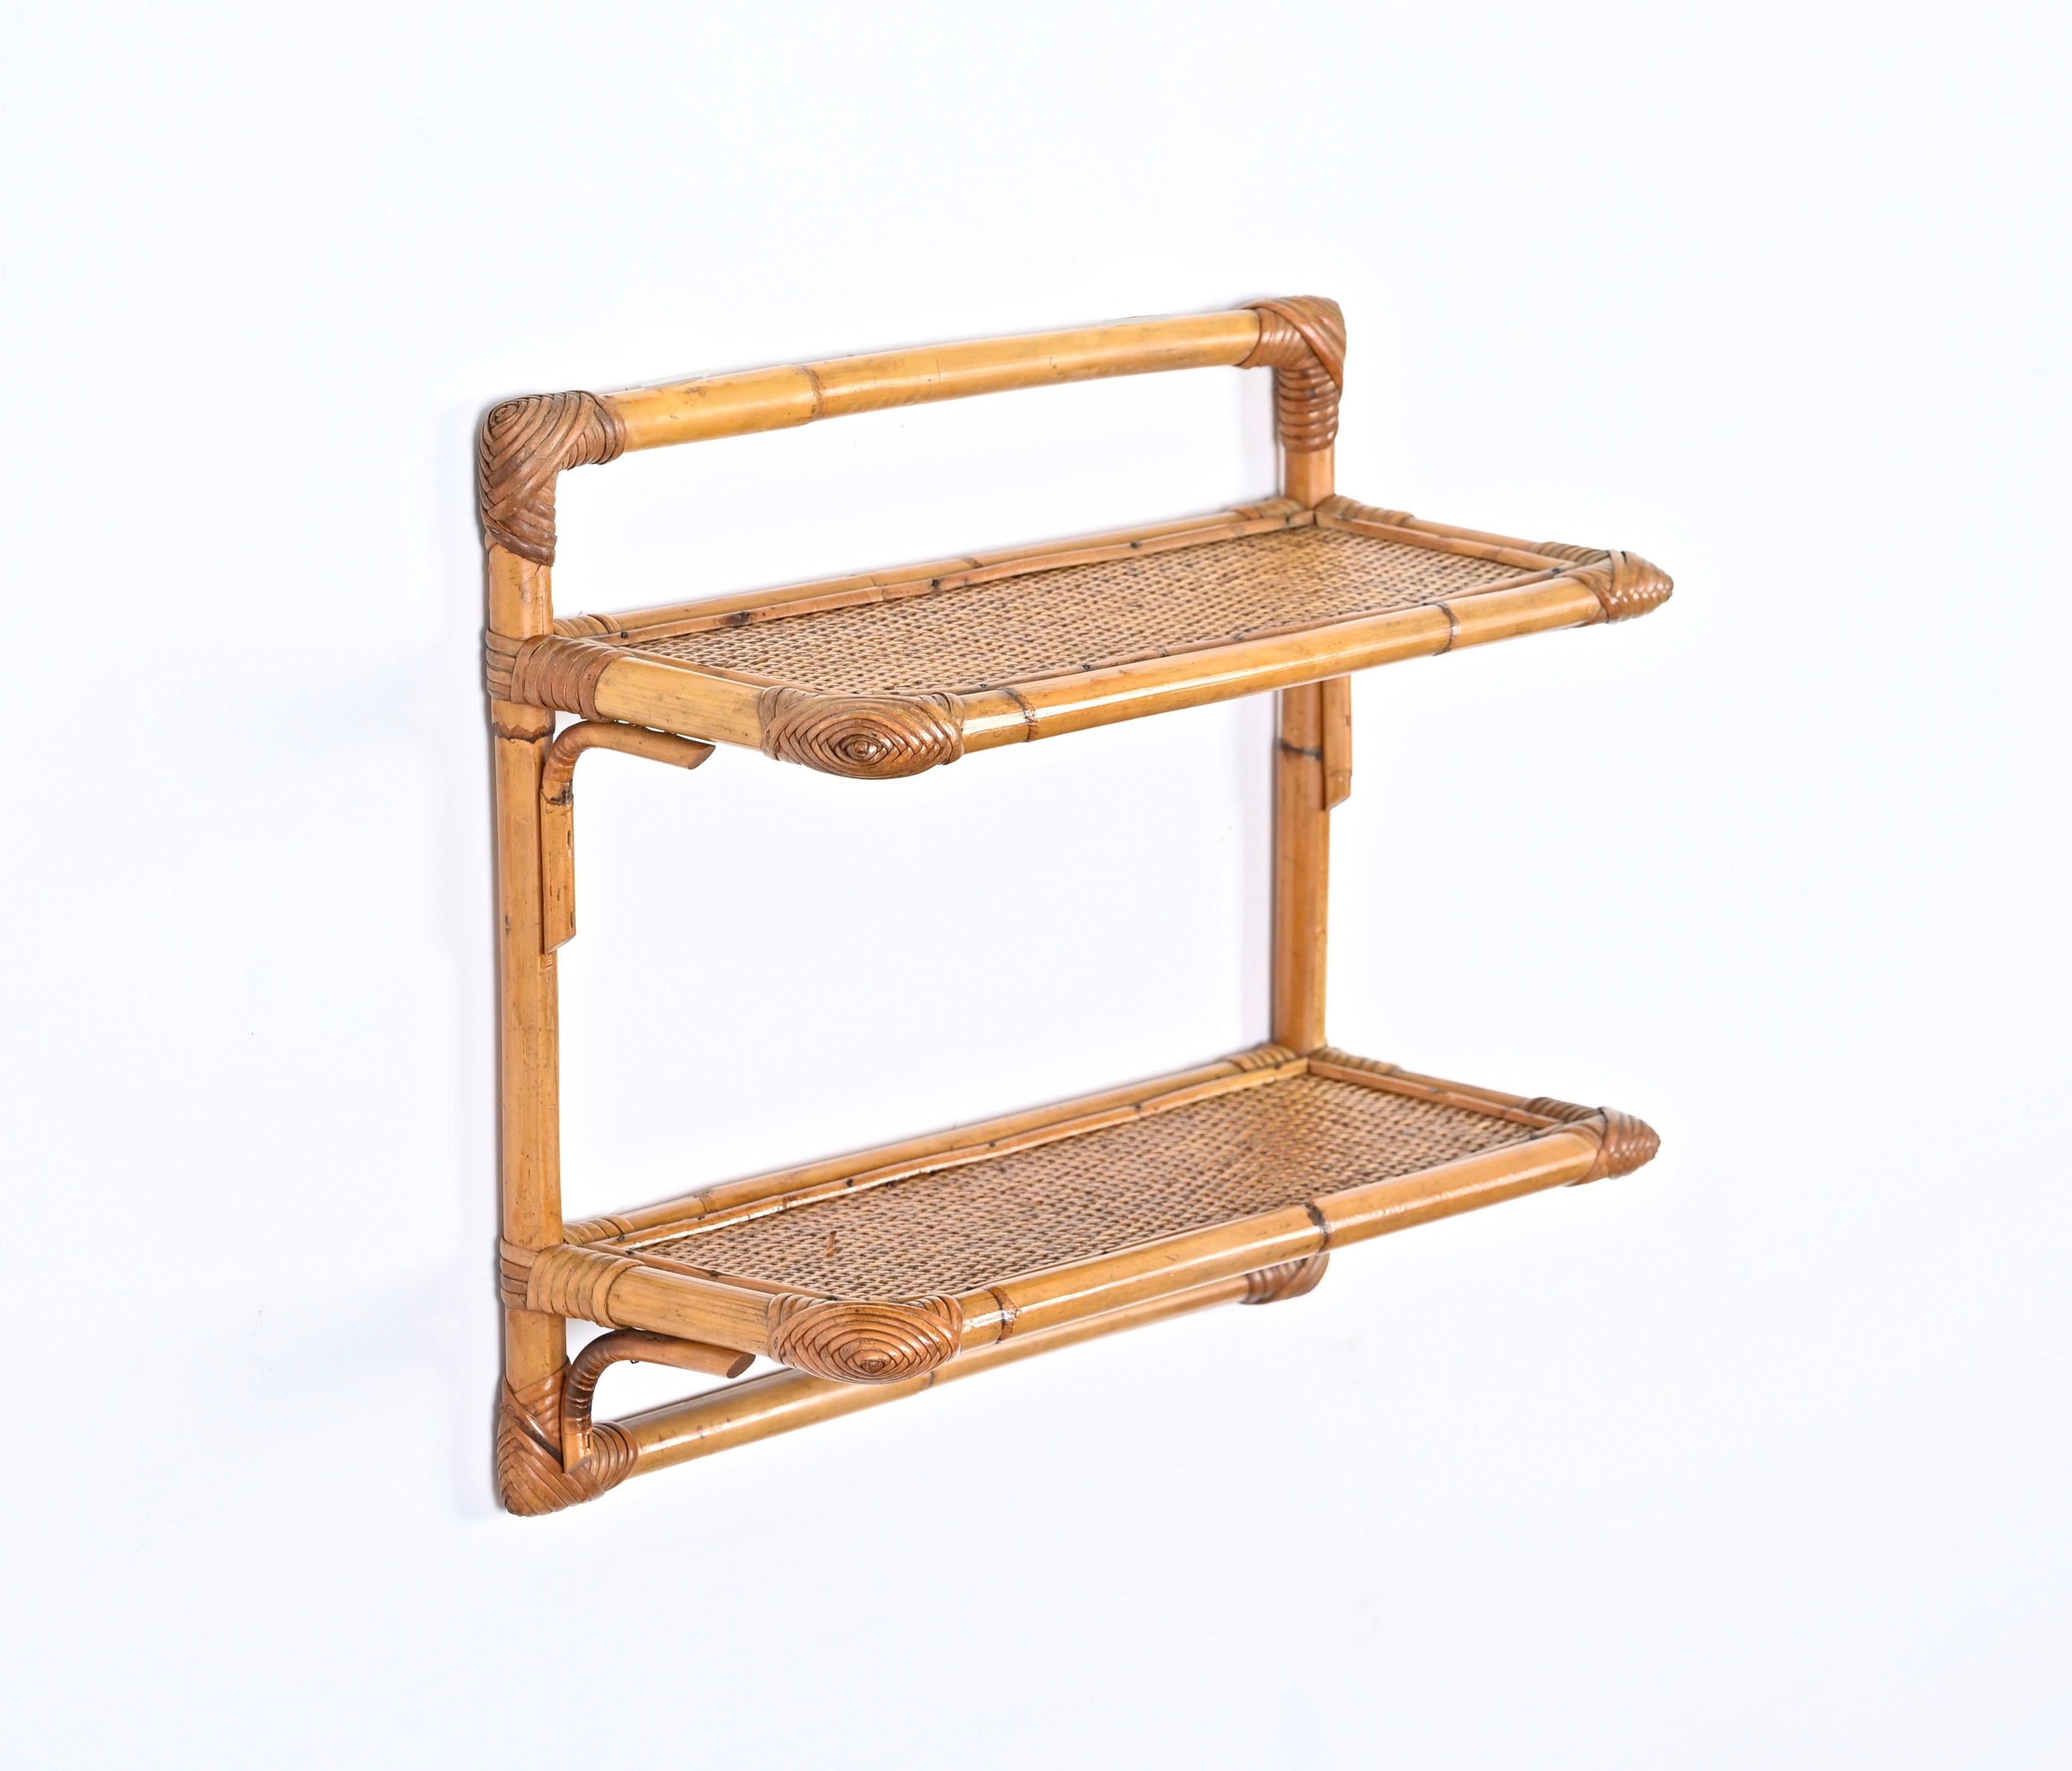 Lovely Mid-Century two tier wall shelf in bamboo and rattan. Vivai del Sud likely designed this beautiful piece in Italy in the 1970s.

This structure is made in bamboo canes with the rectangular shelves made in wood and finished with woven wicker.